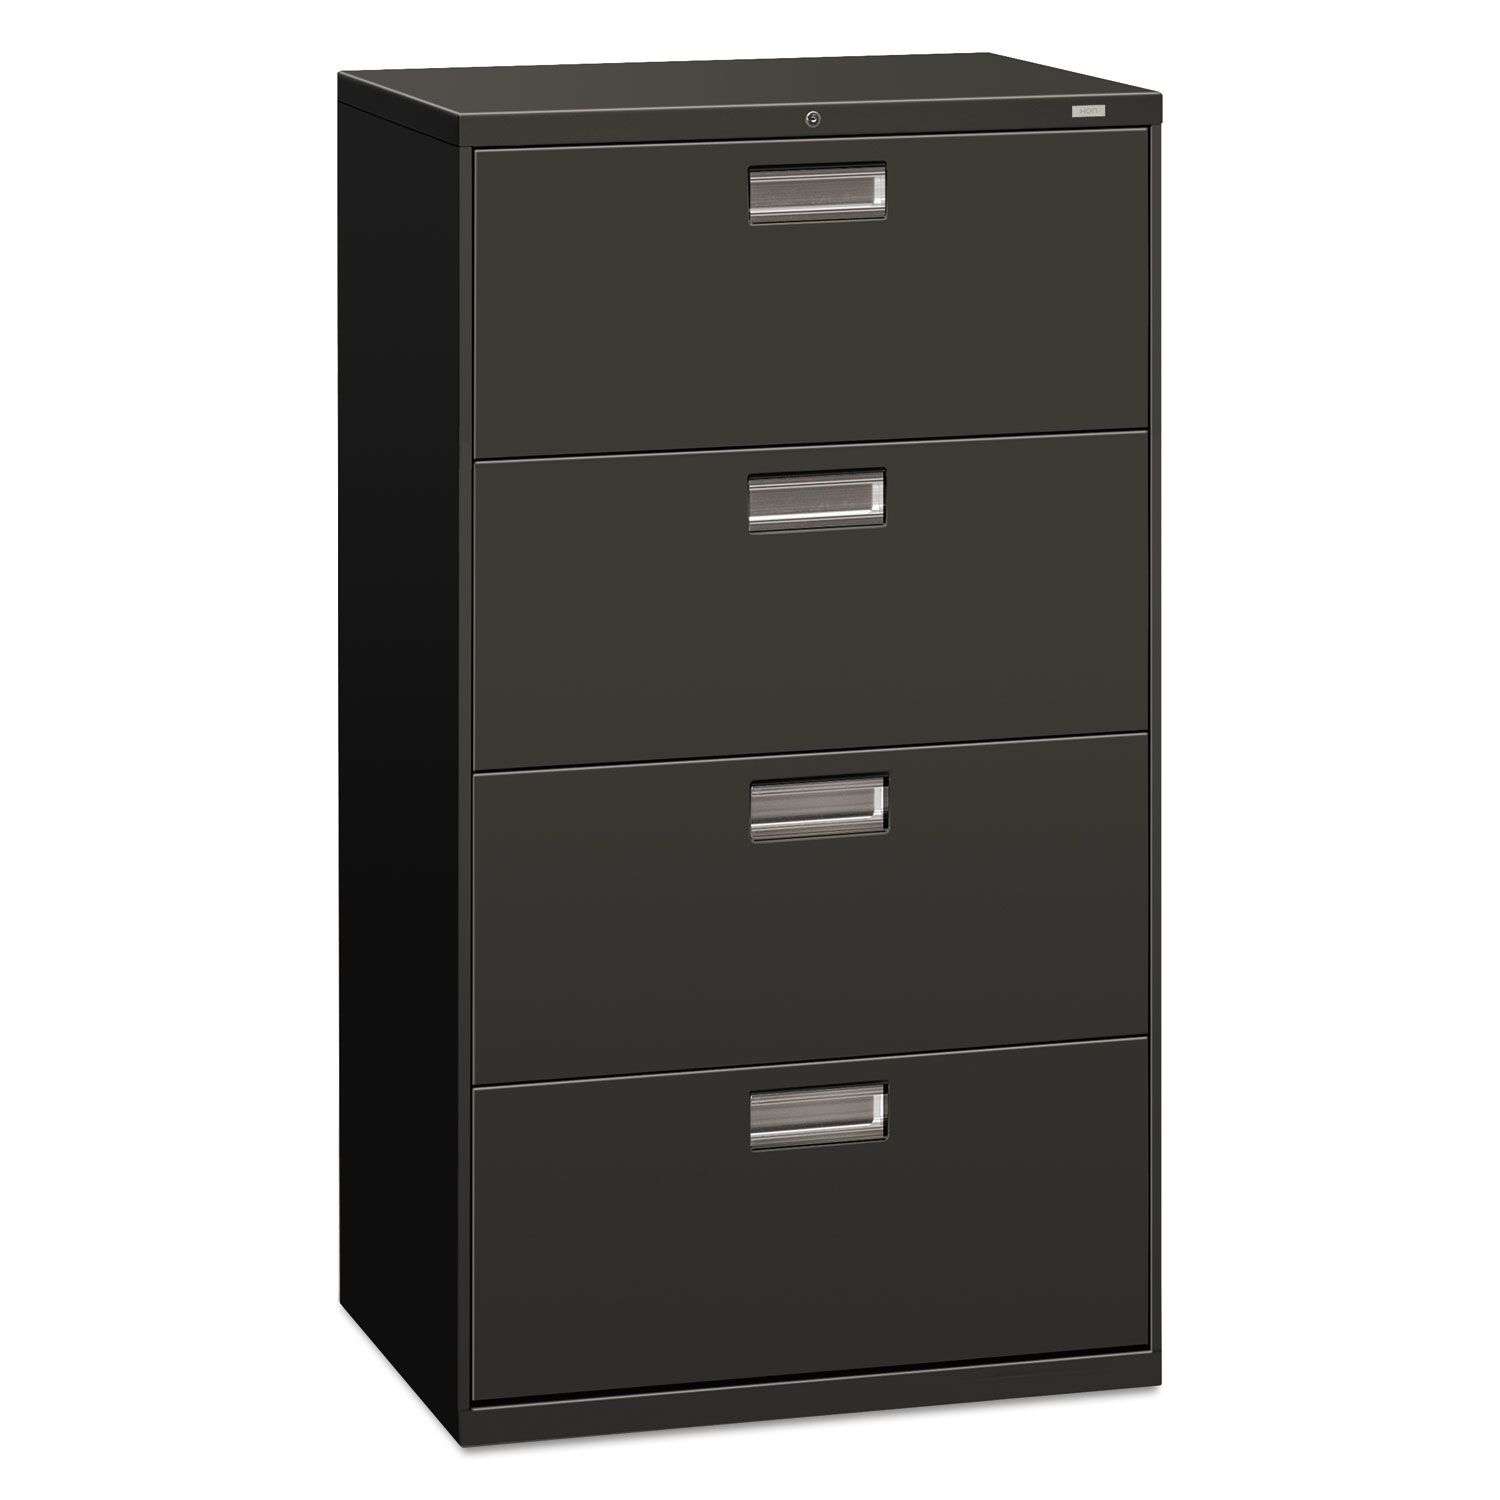 600 Series Four-Drawer Lateral File, 30w x 19-1/4d, Charcoal